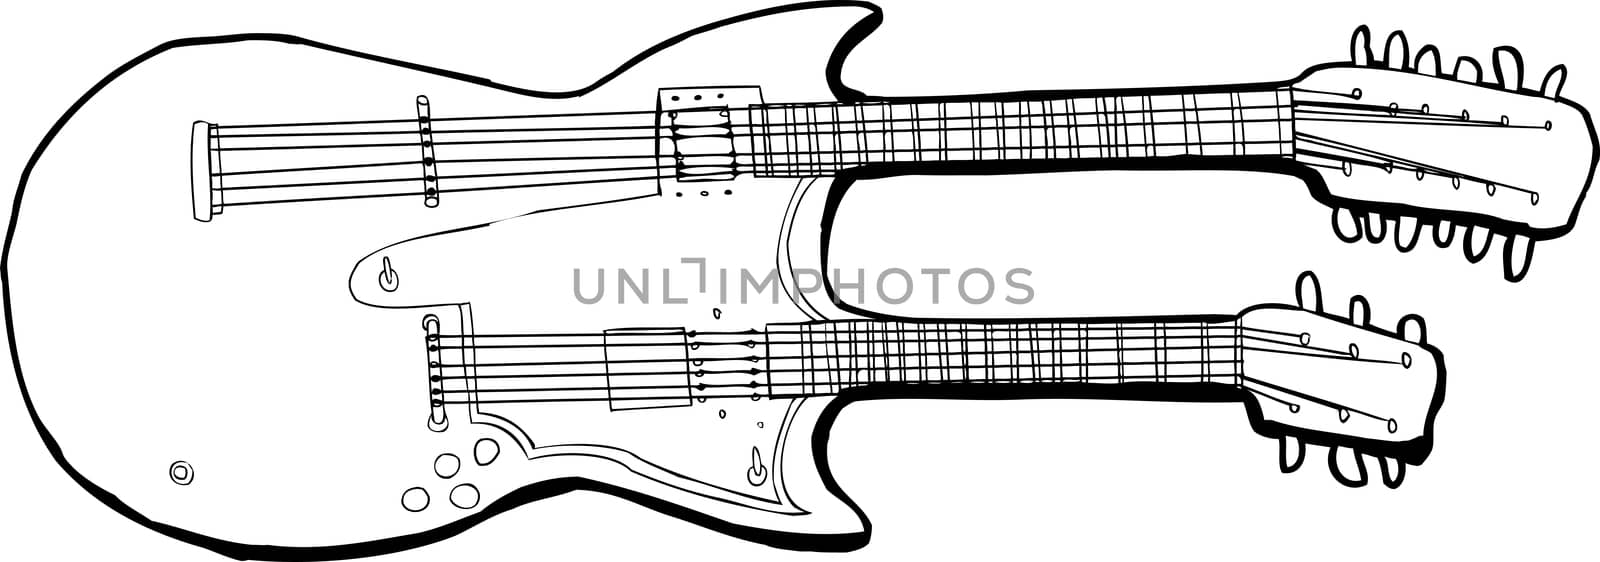 Outline of Unique Guitar by TheBlackRhino